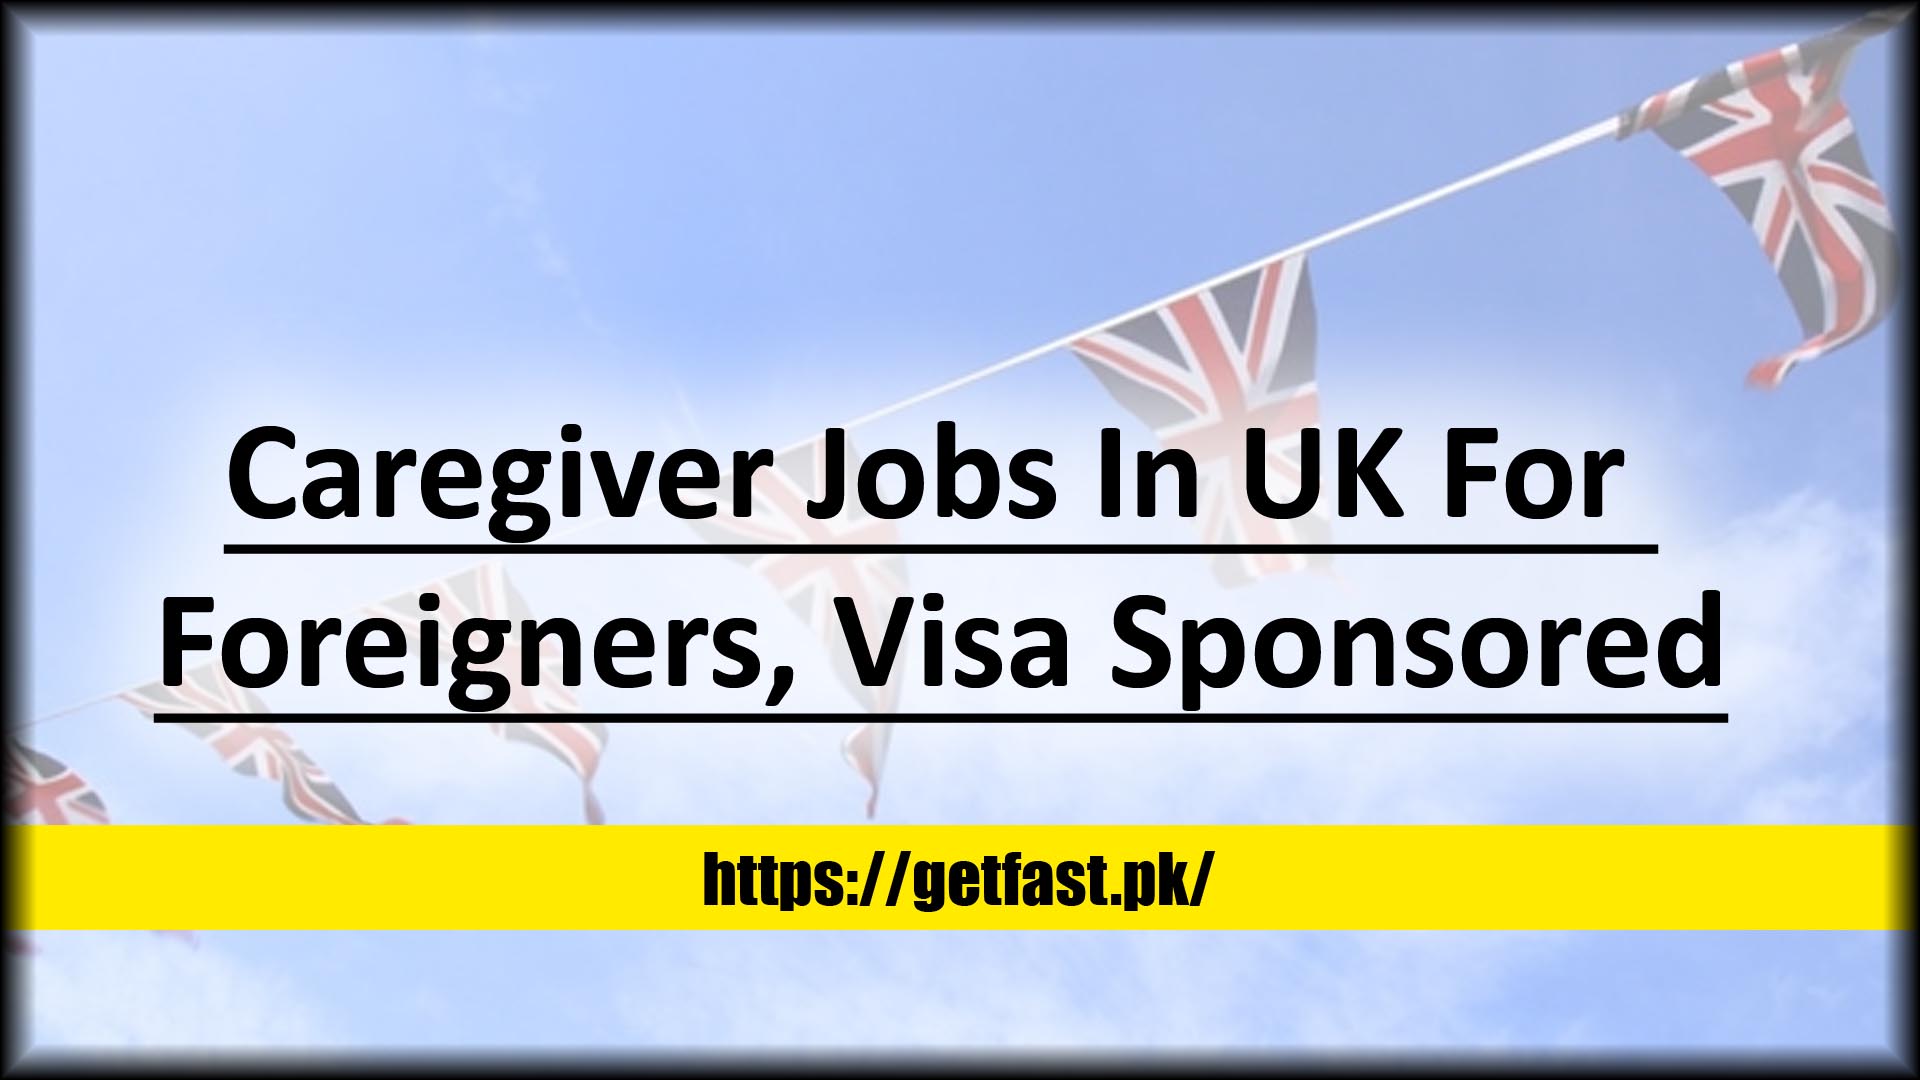 Caregiver Jobs In UK For Foreigners